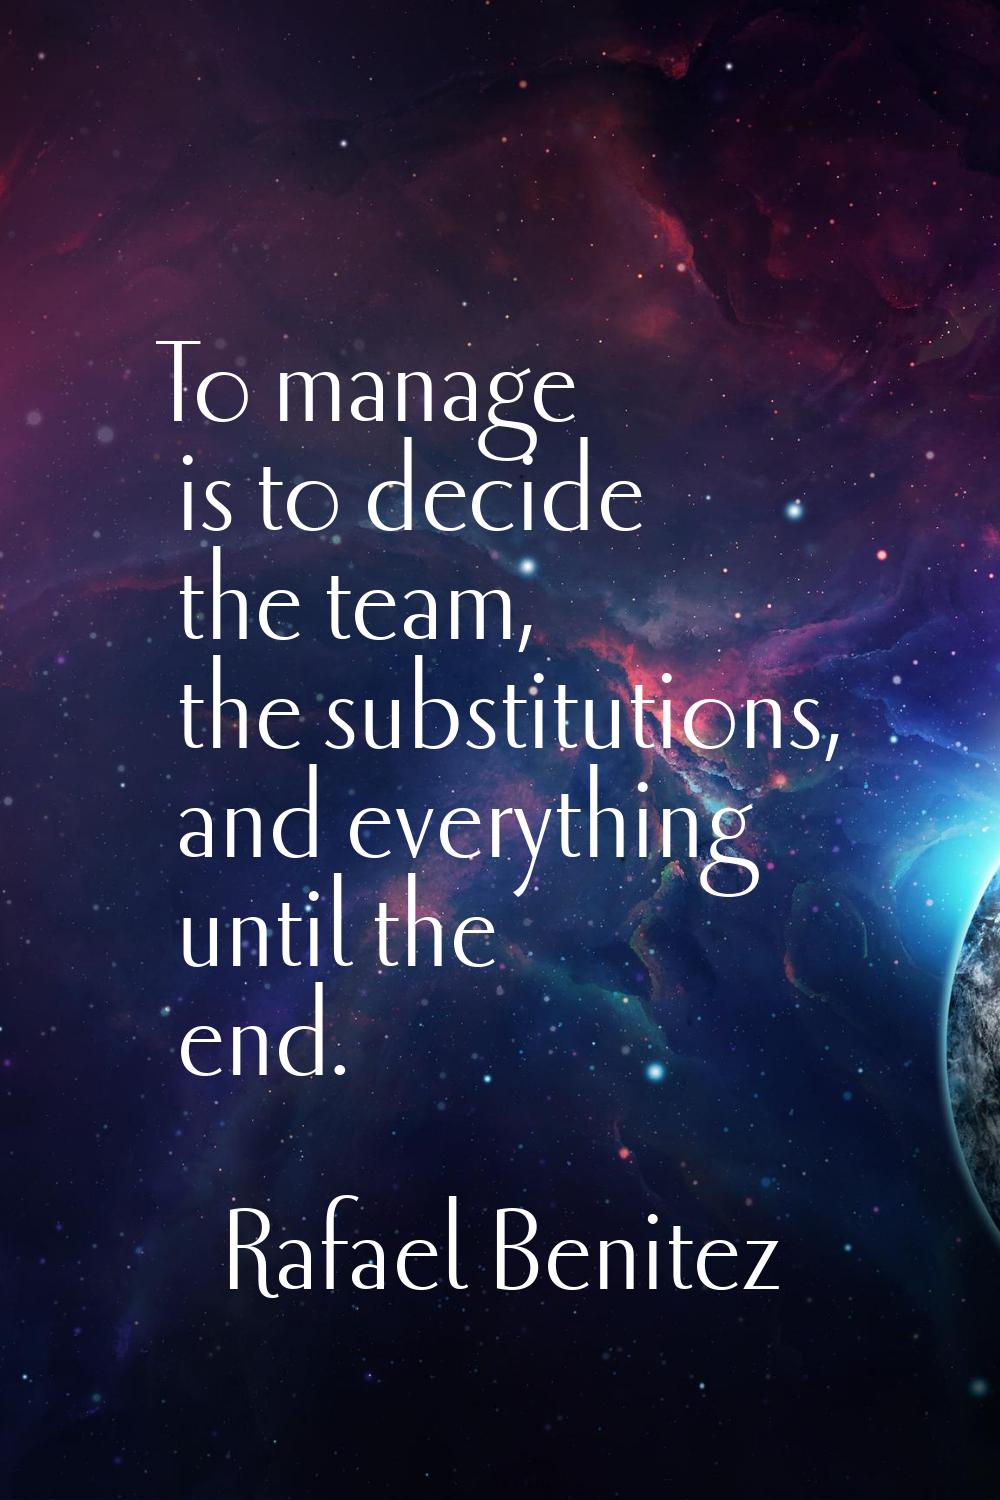 To manage is to decide the team, the substitutions, and everything until the end.